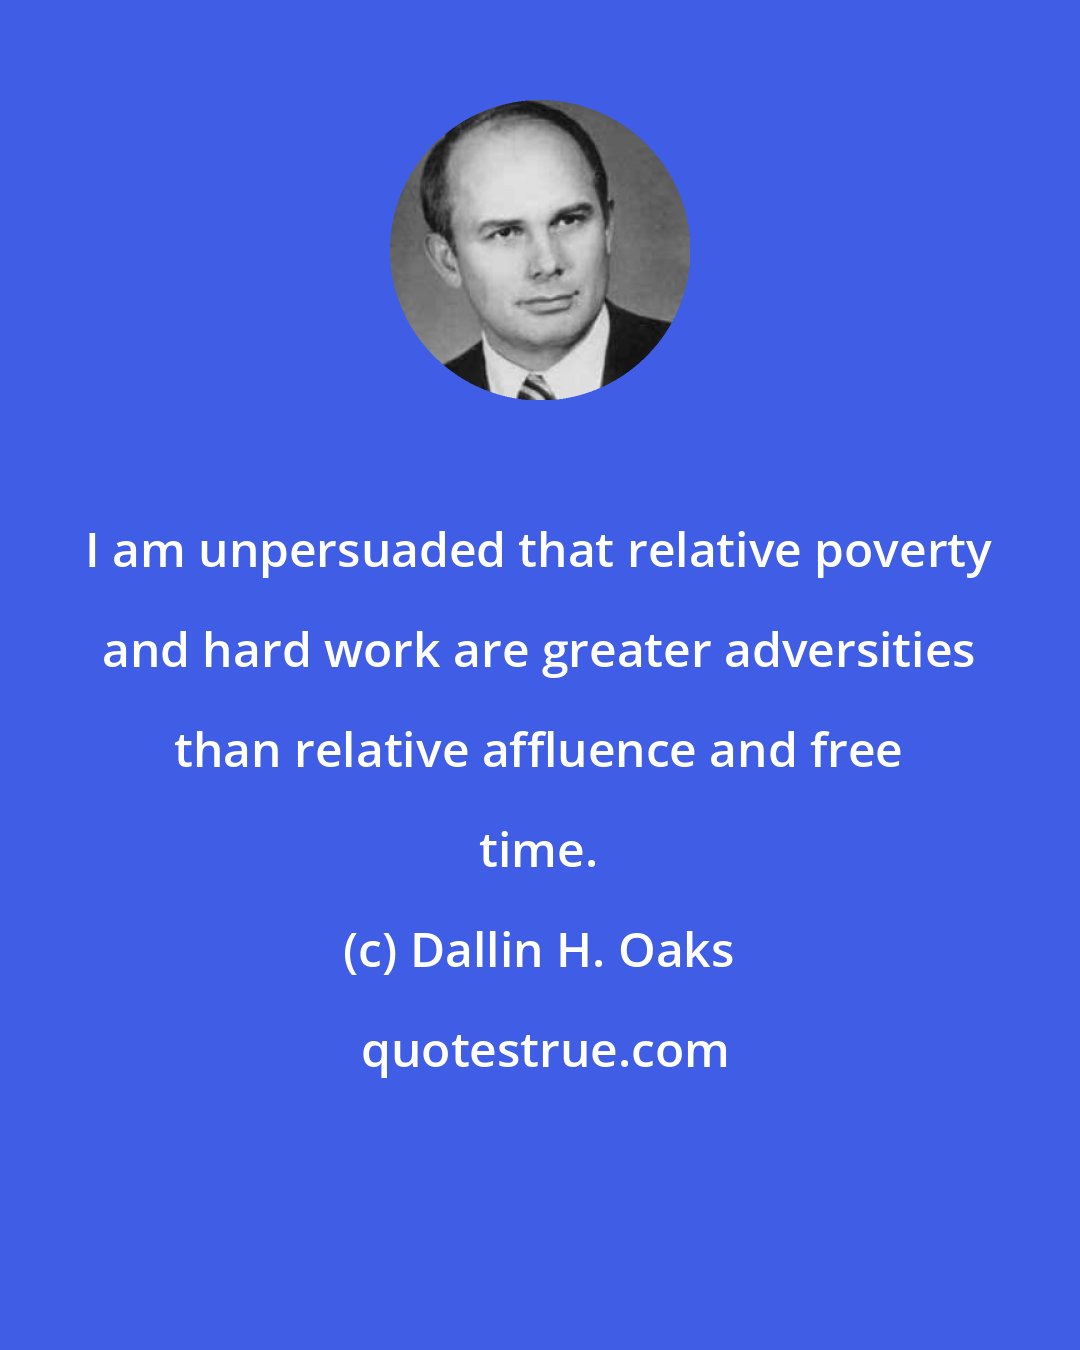 Dallin H. Oaks: I am unpersuaded that relative poverty and hard work are greater adversities than relative affluence and free time.